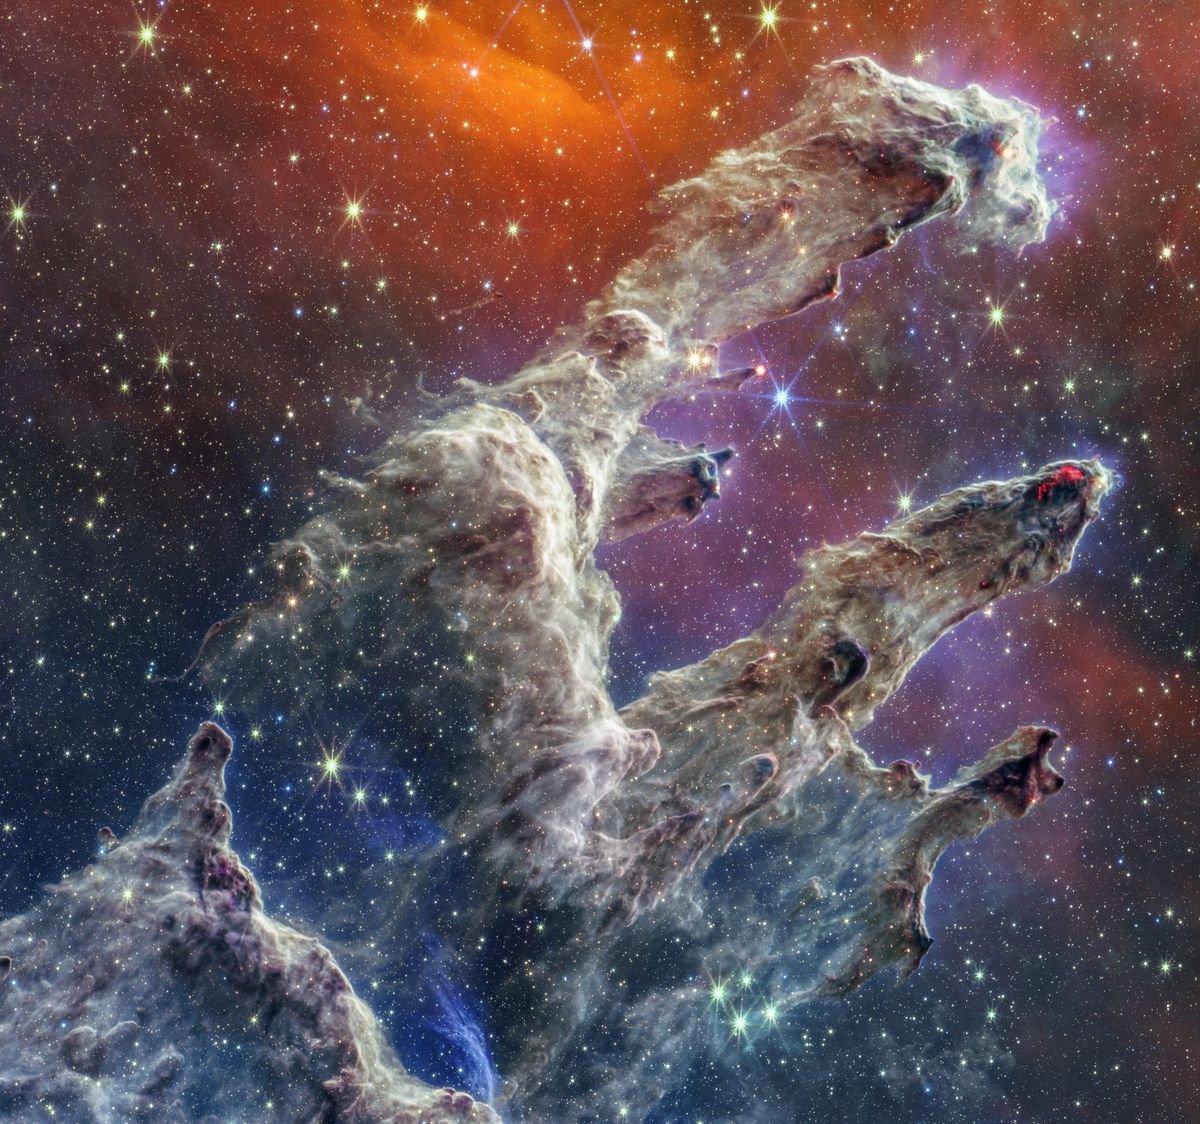 A composite of the Pillars of Creation taken by NASA's James Webb Space Telescope